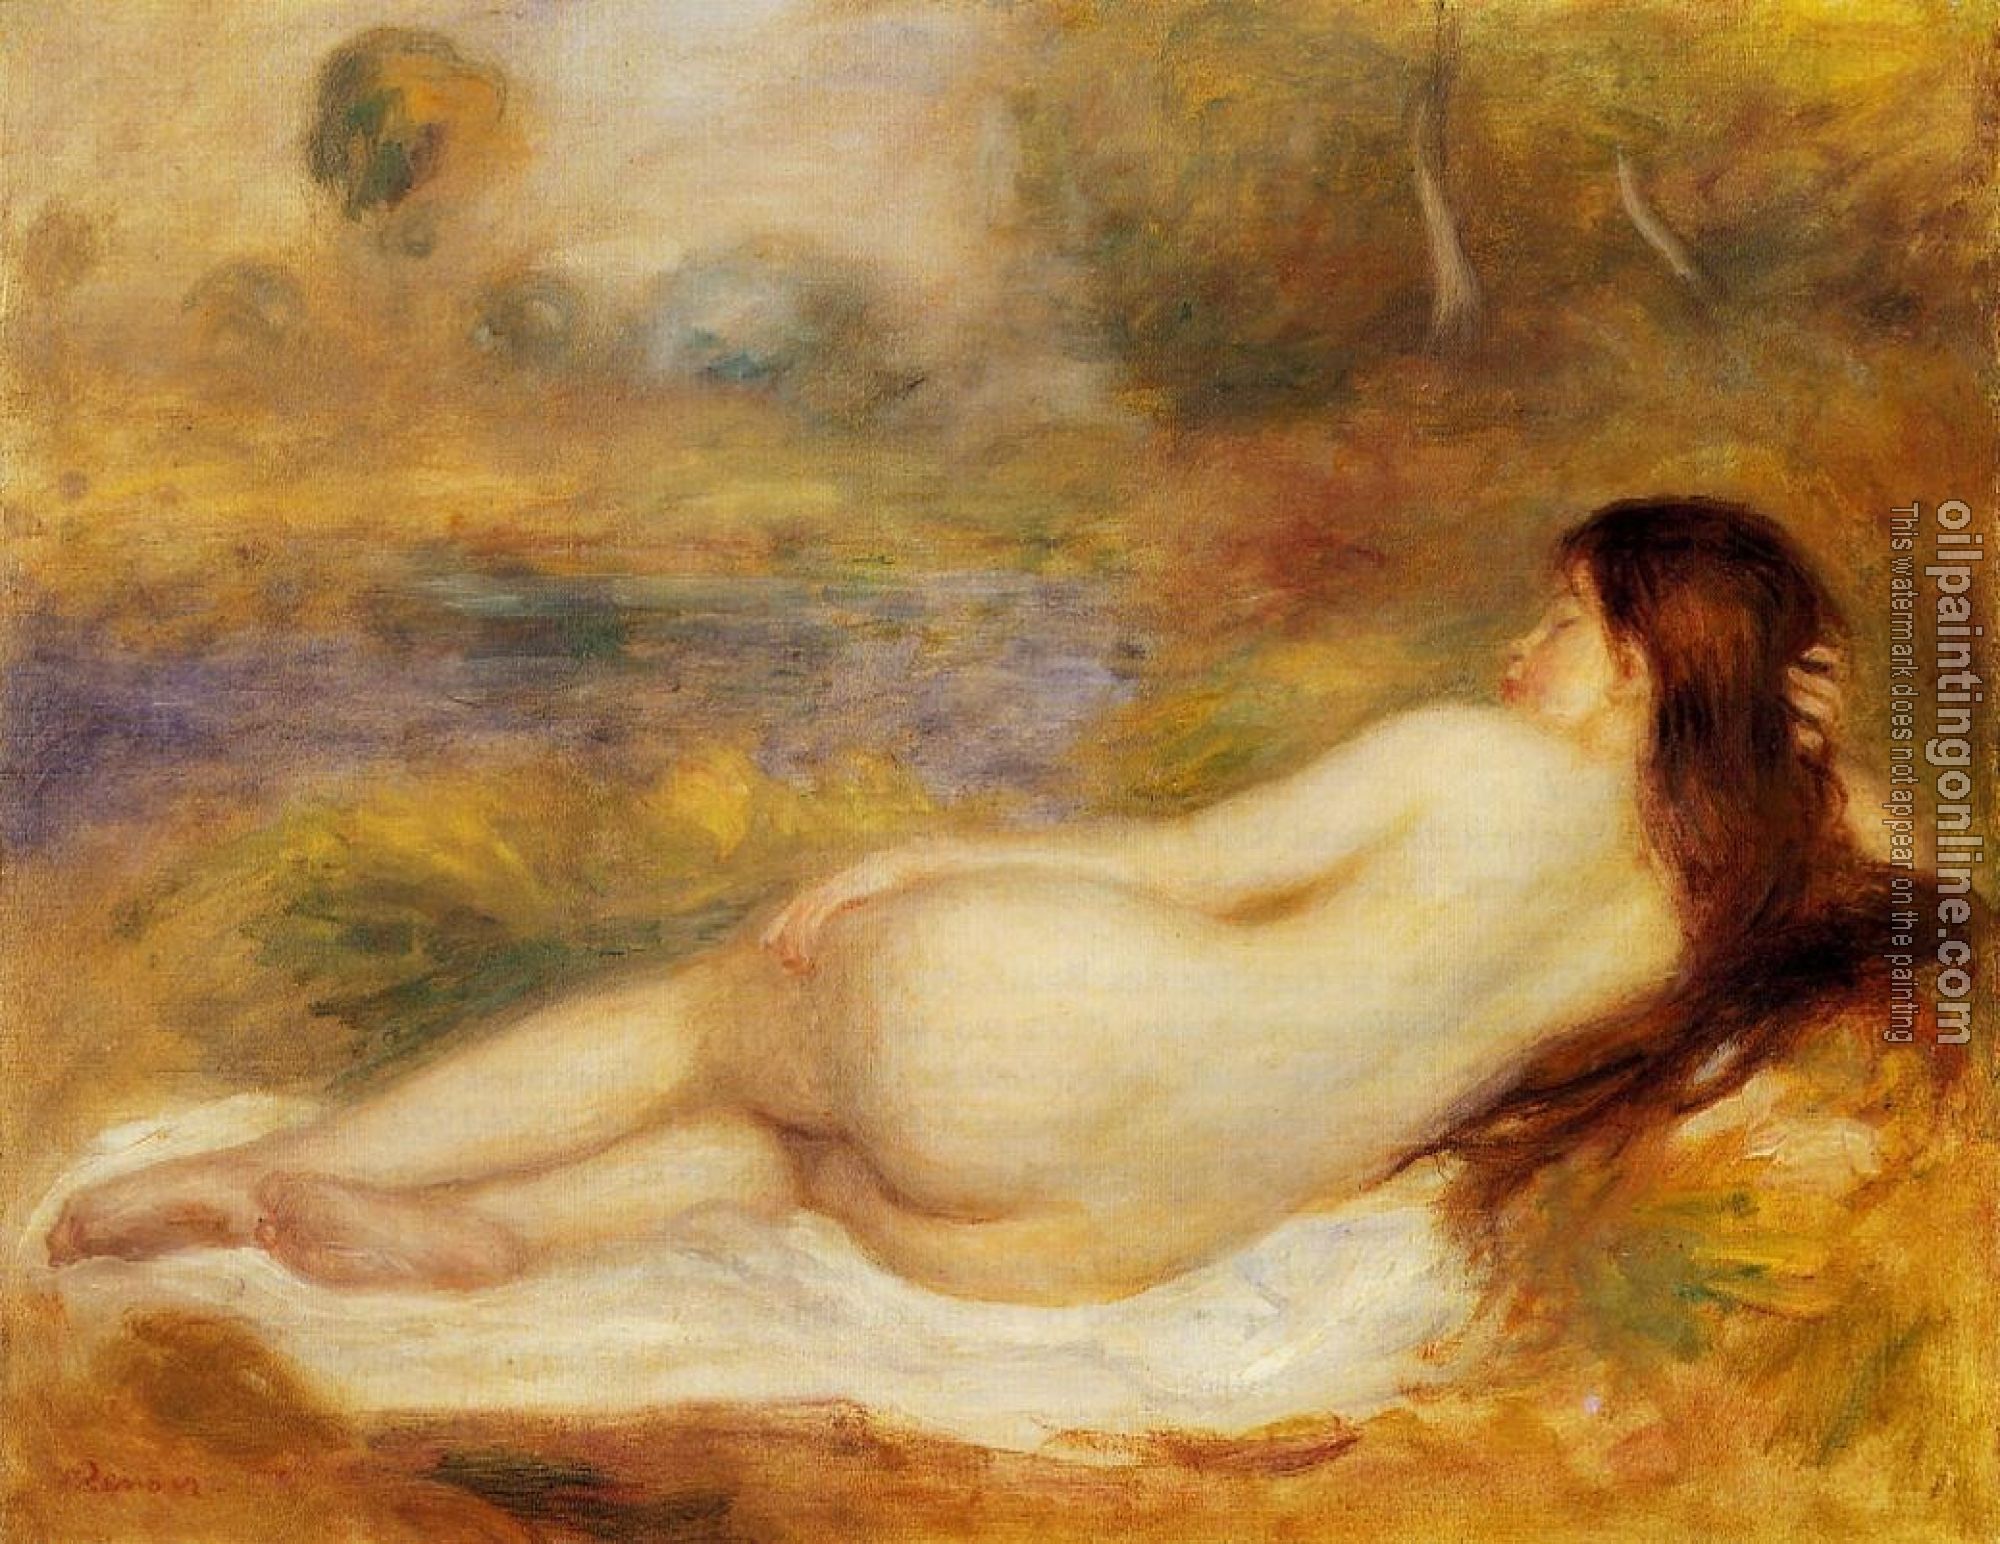 Renoir, Pierre Auguste - Nude Reclining on the Grass